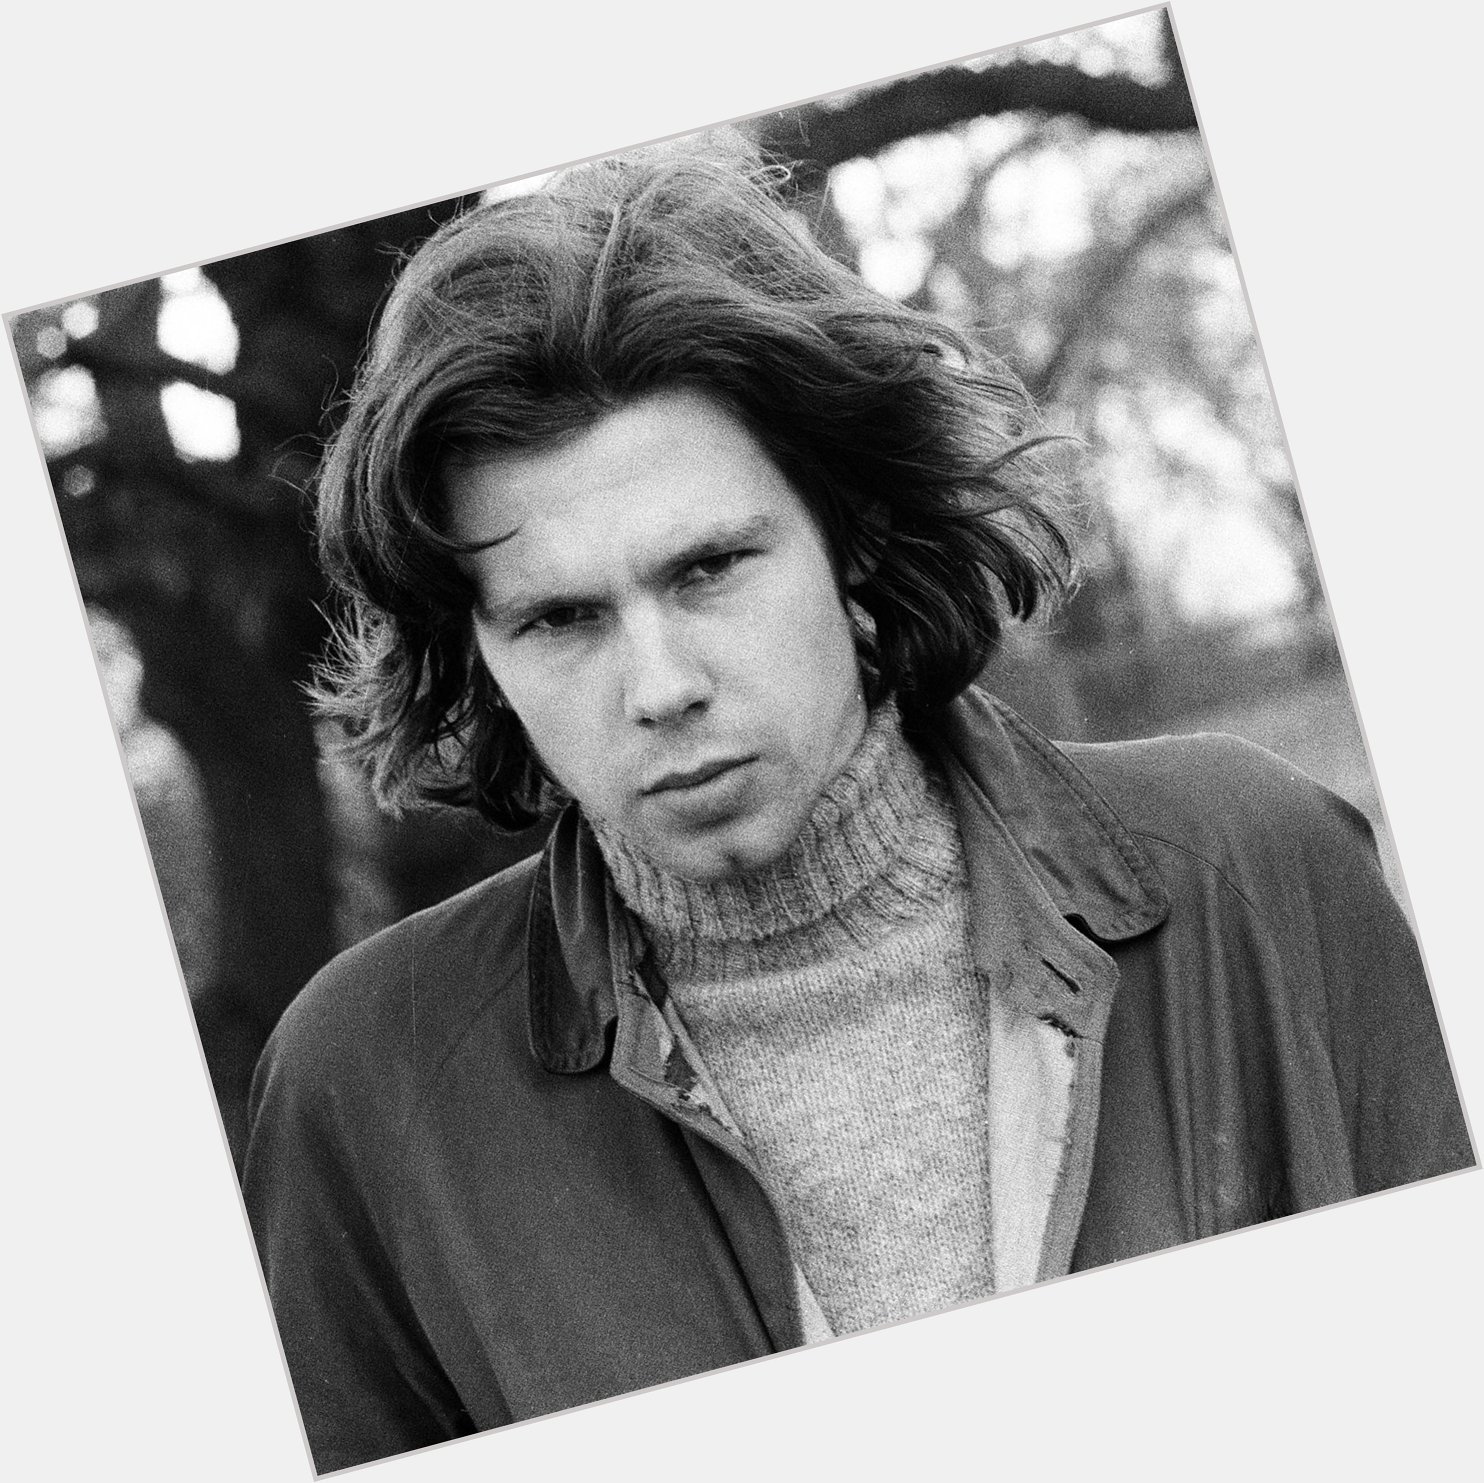 Happy Birthday to one of the all-time greats, Nick Drake. Born on this day in 1948. 